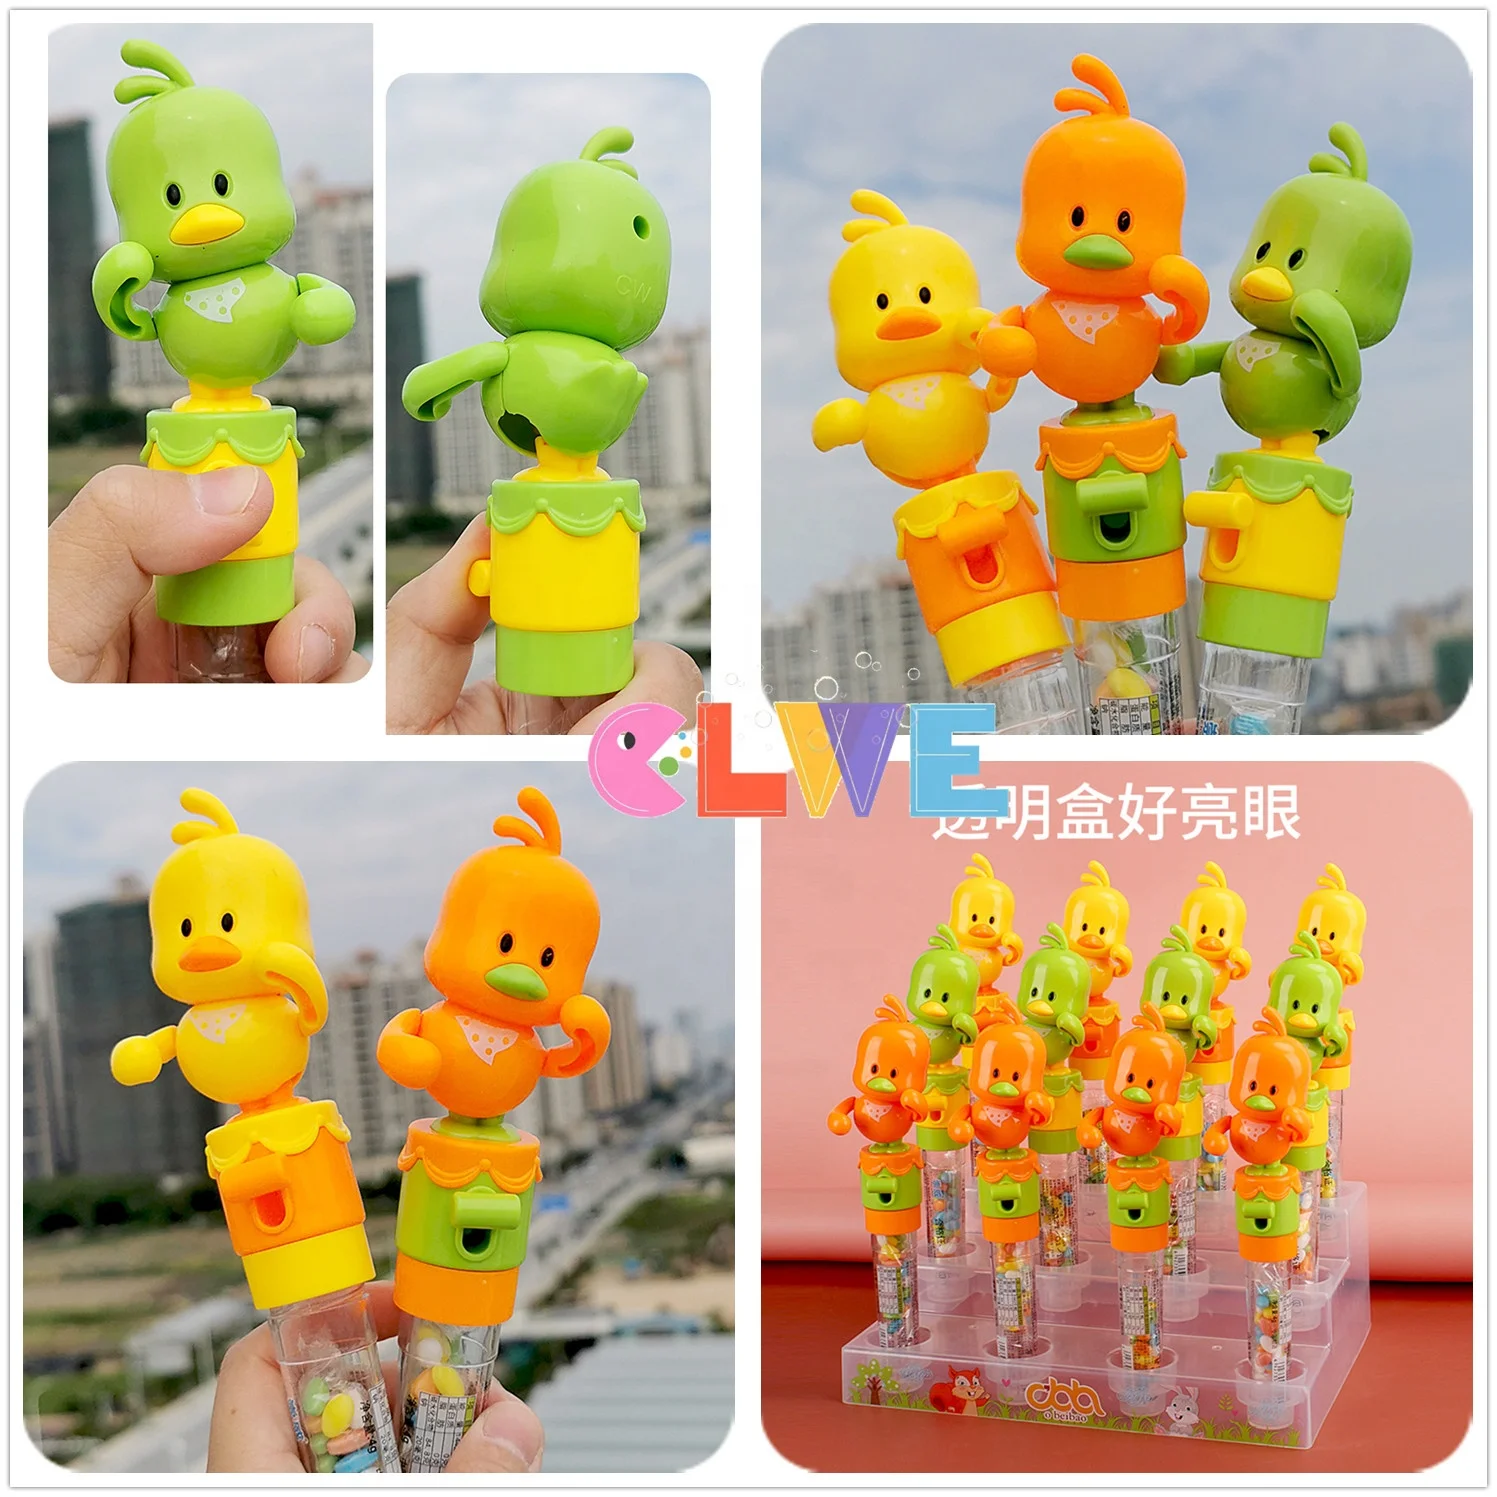 hot sale Good quality ABS toys dancing duck animal duck candy toy for kids Novelty Educational dancing duck Toys candy